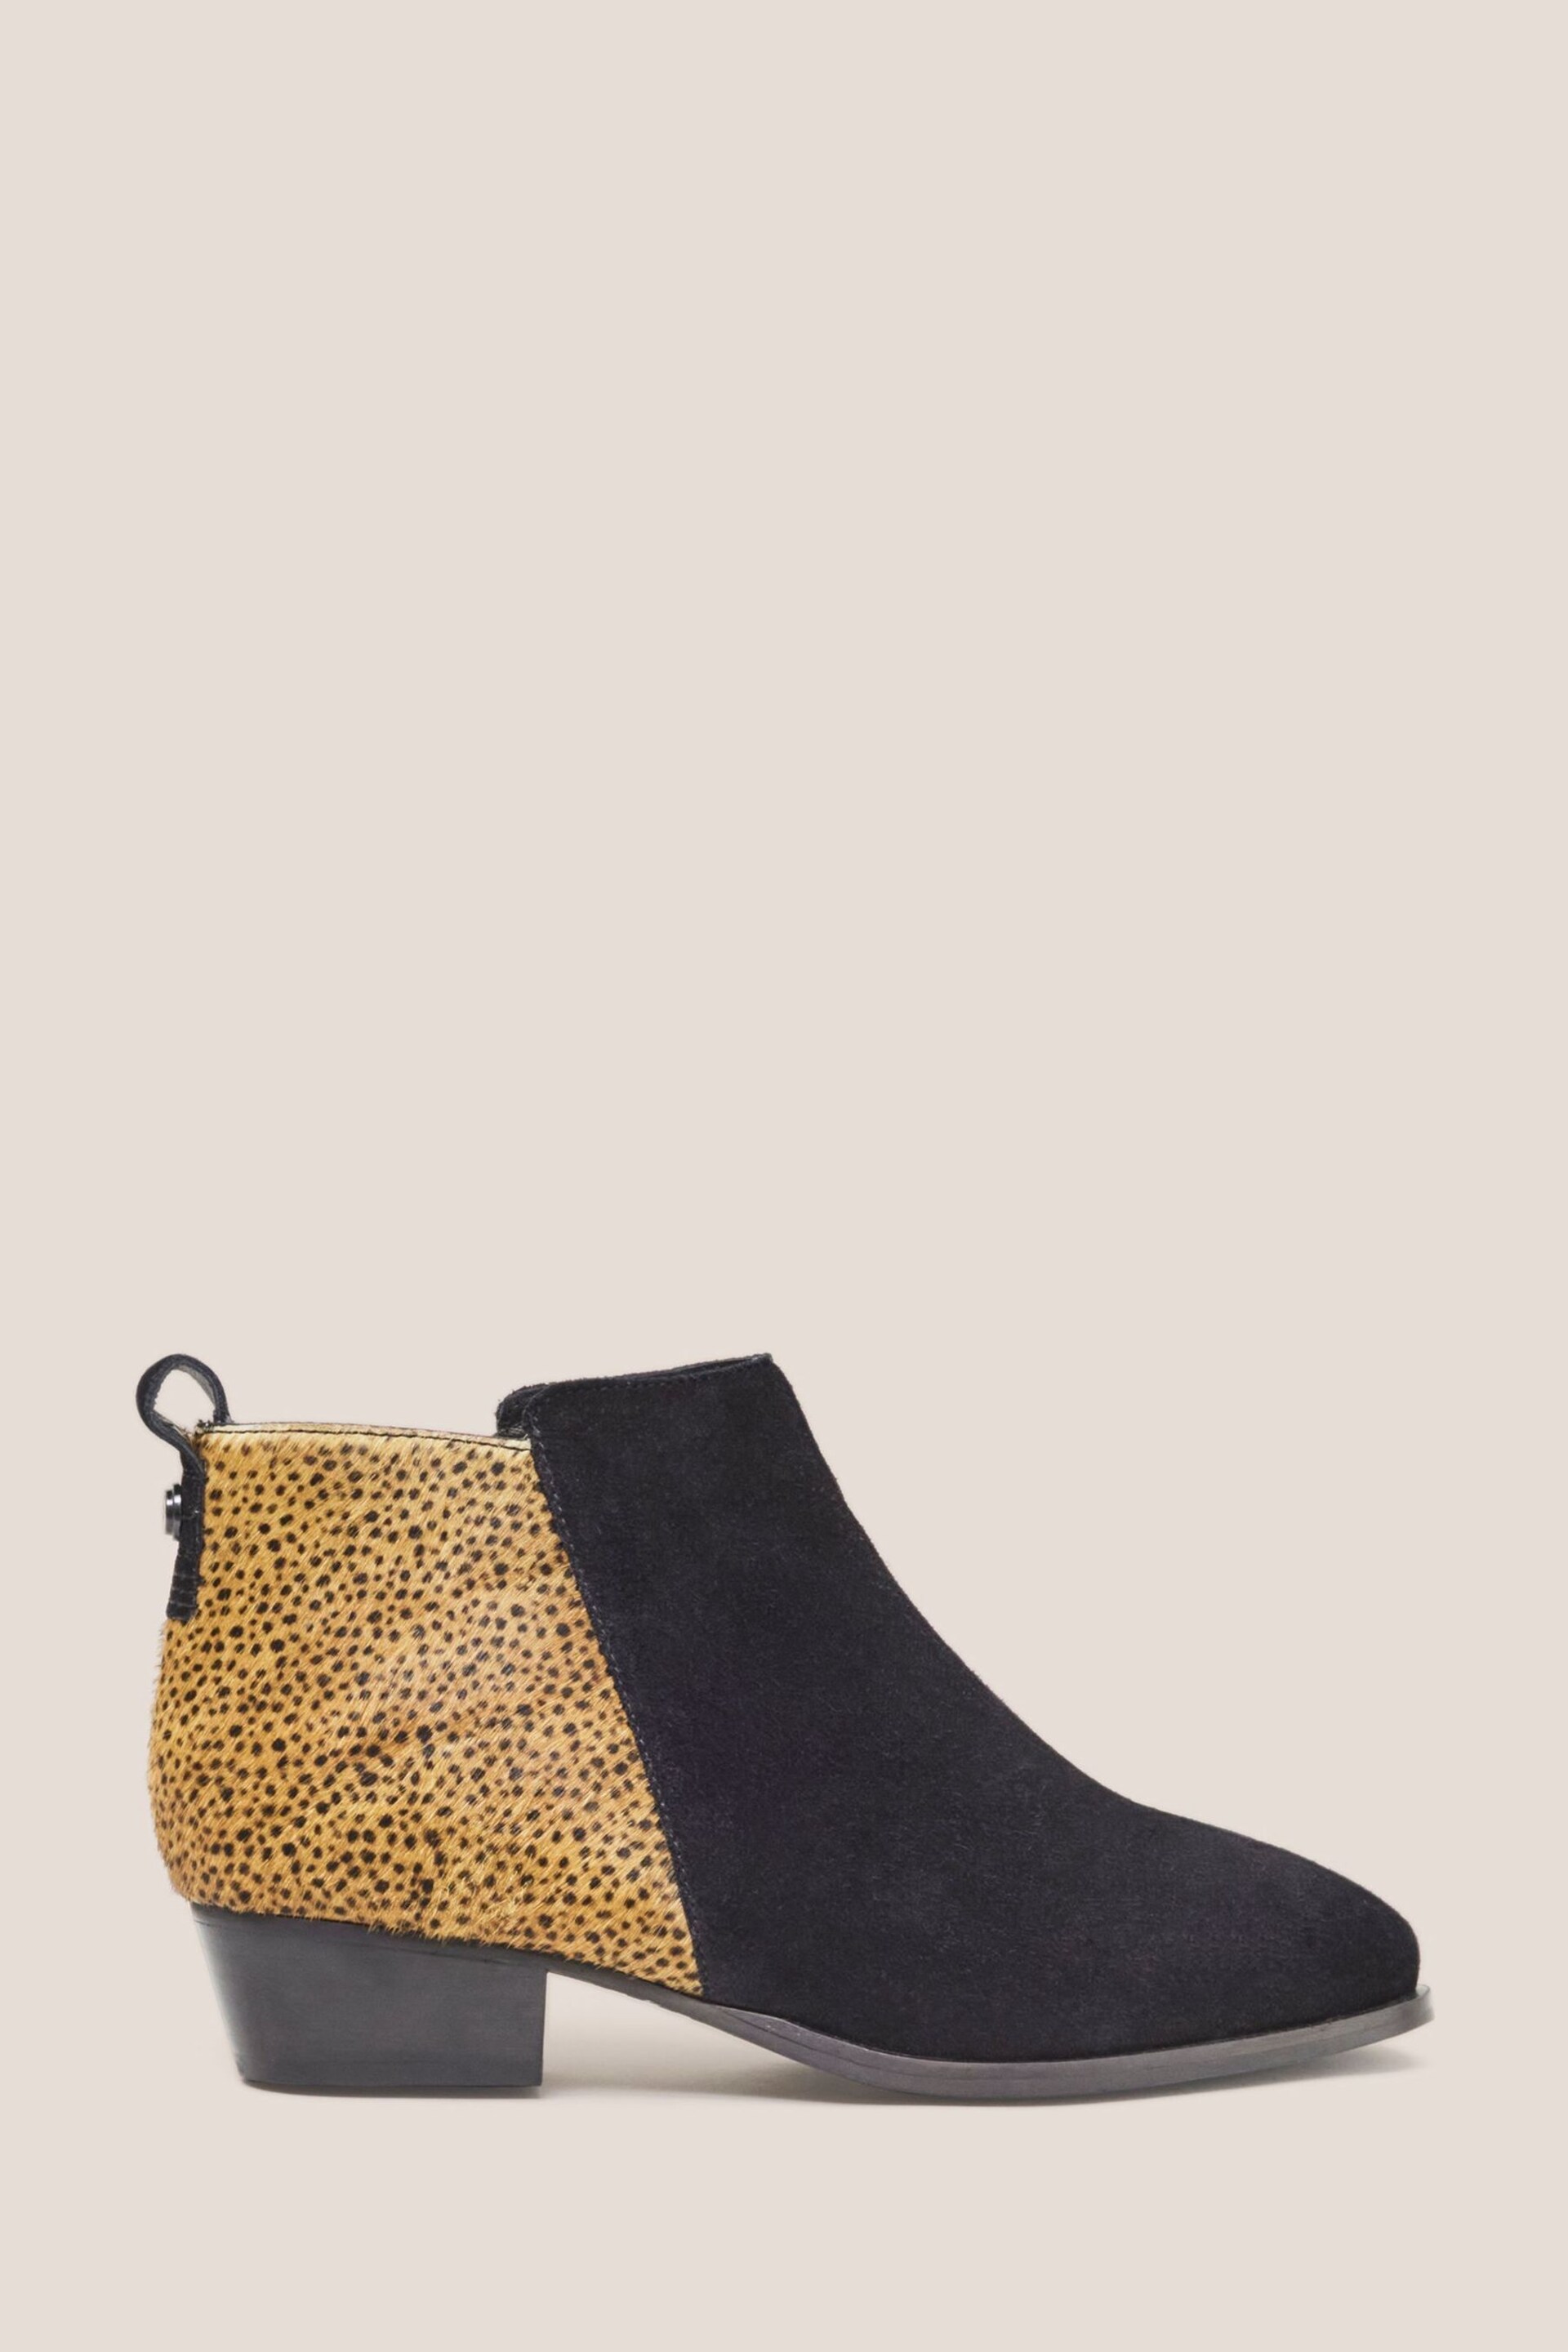 White Stuff Black Suede Pony Willow Ankle Boots - Image 1 of 4